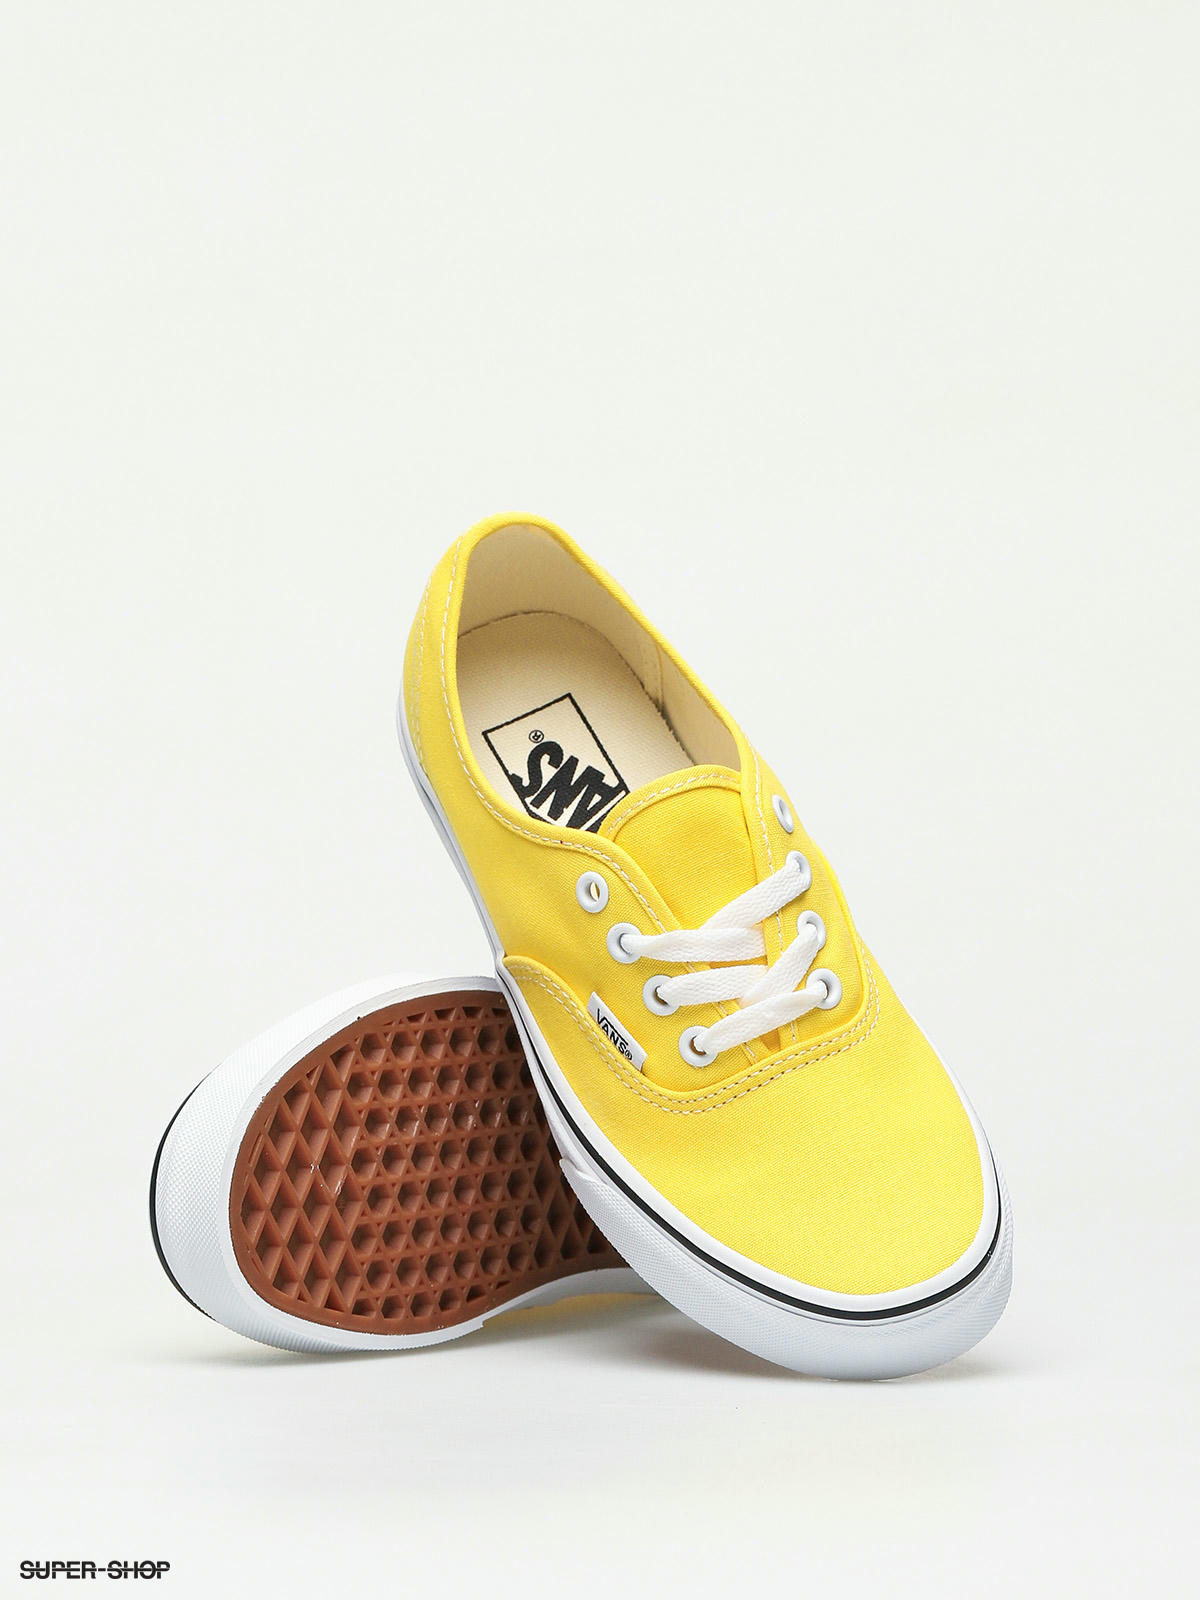 vans shoes yellow white